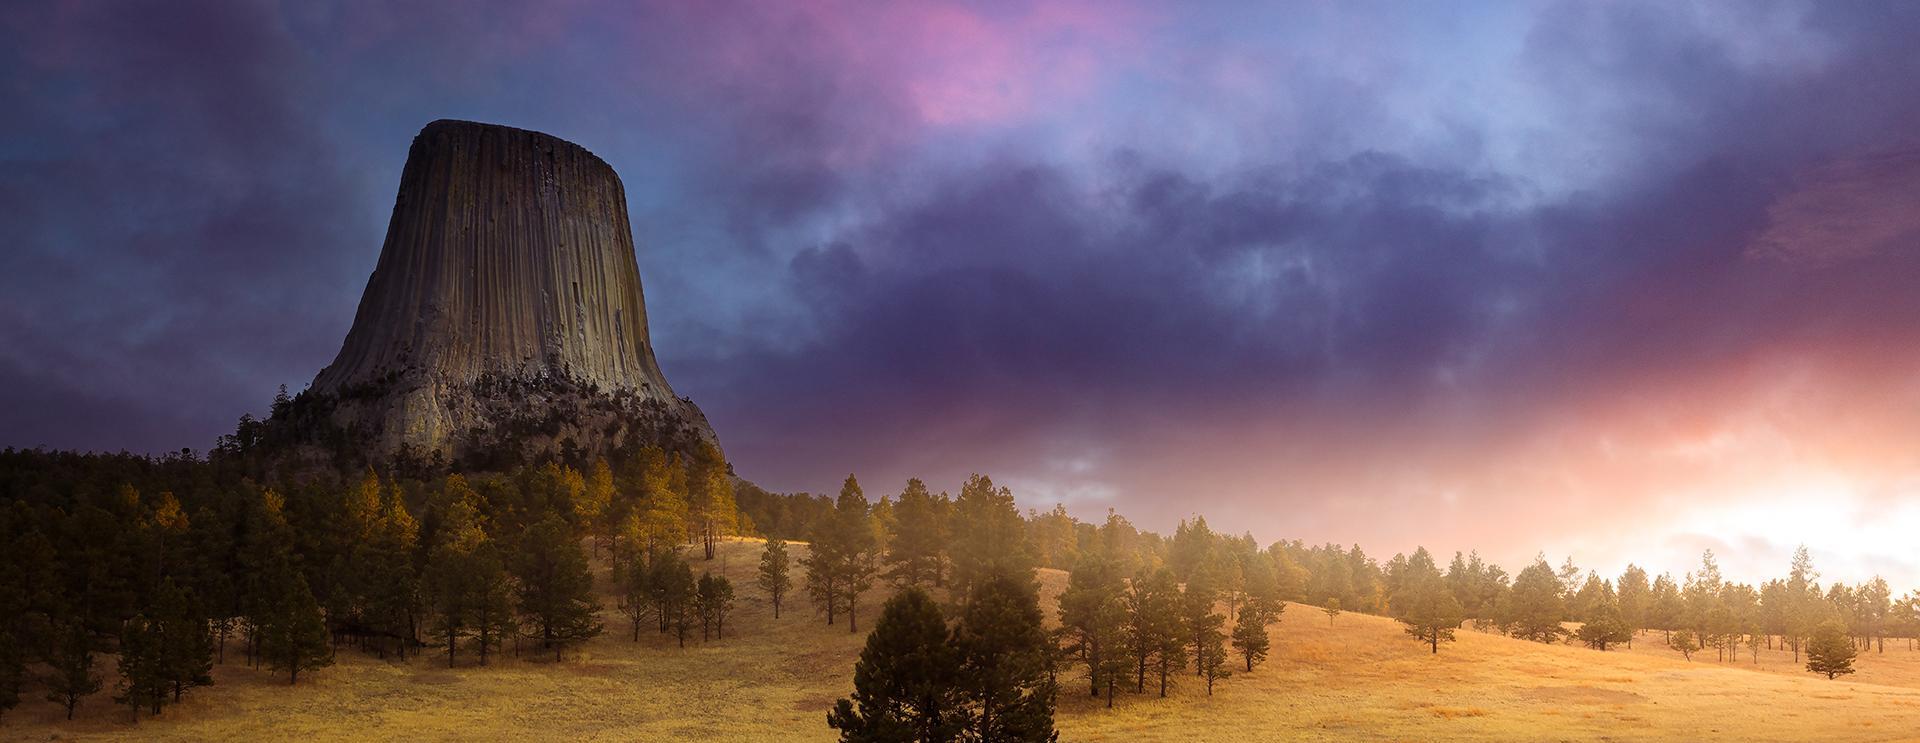 The Most Outstanding Black Hills And Badlands Photos Of November